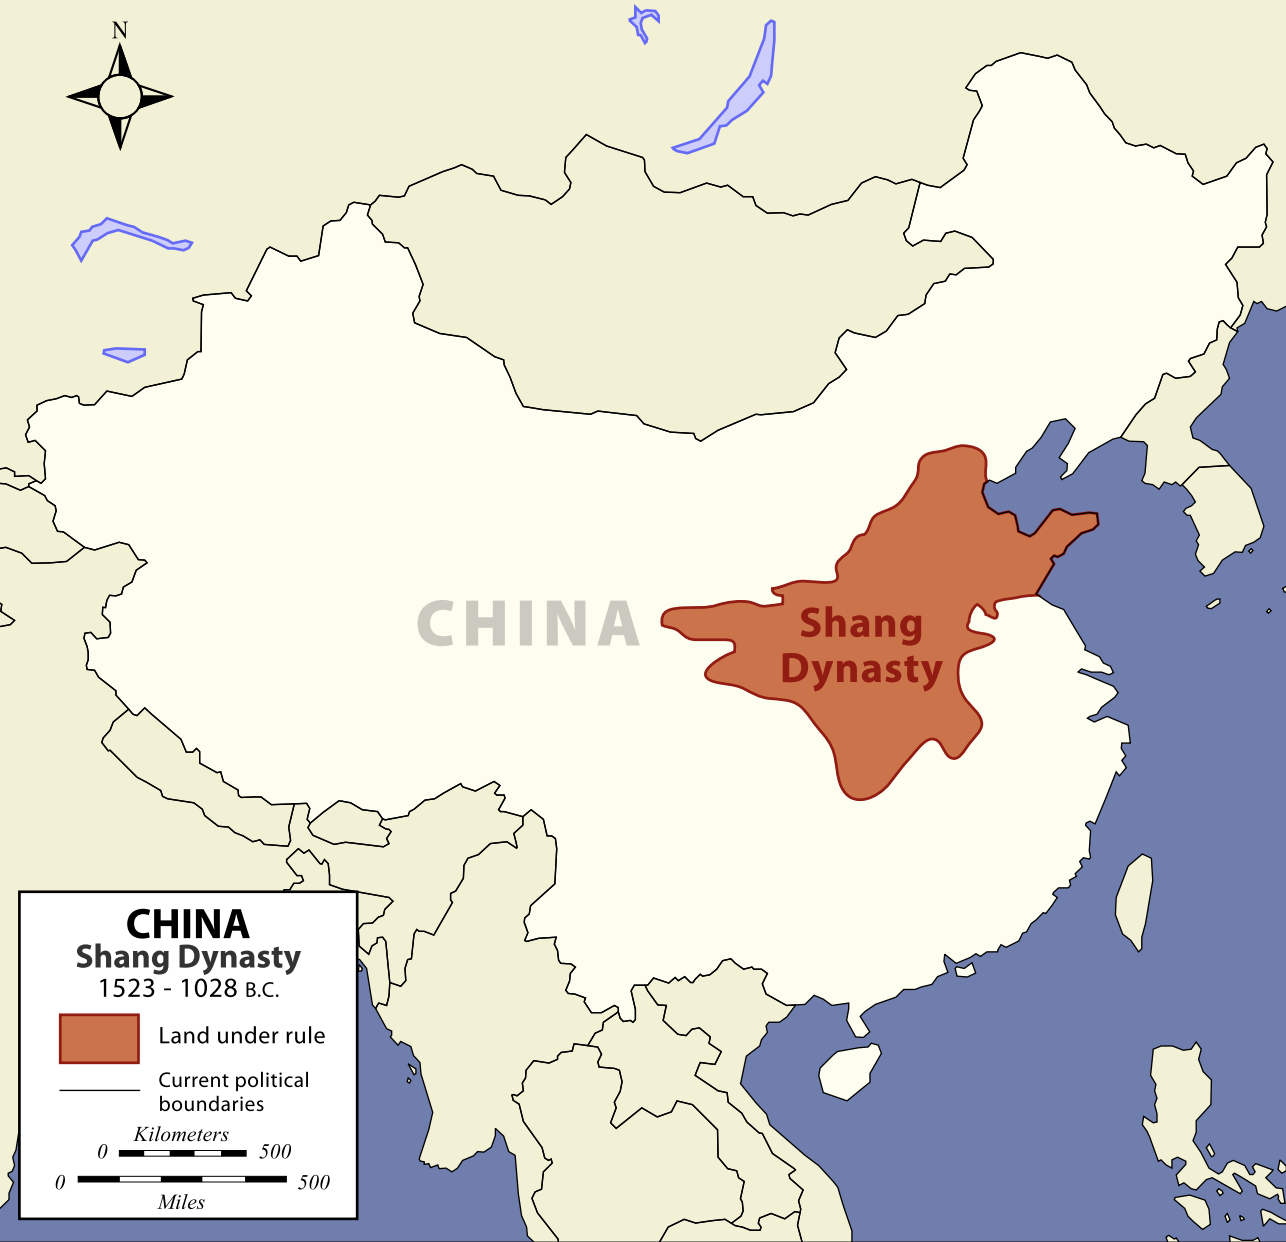 The Shang Dynasty ruled in the north of what is now modern China